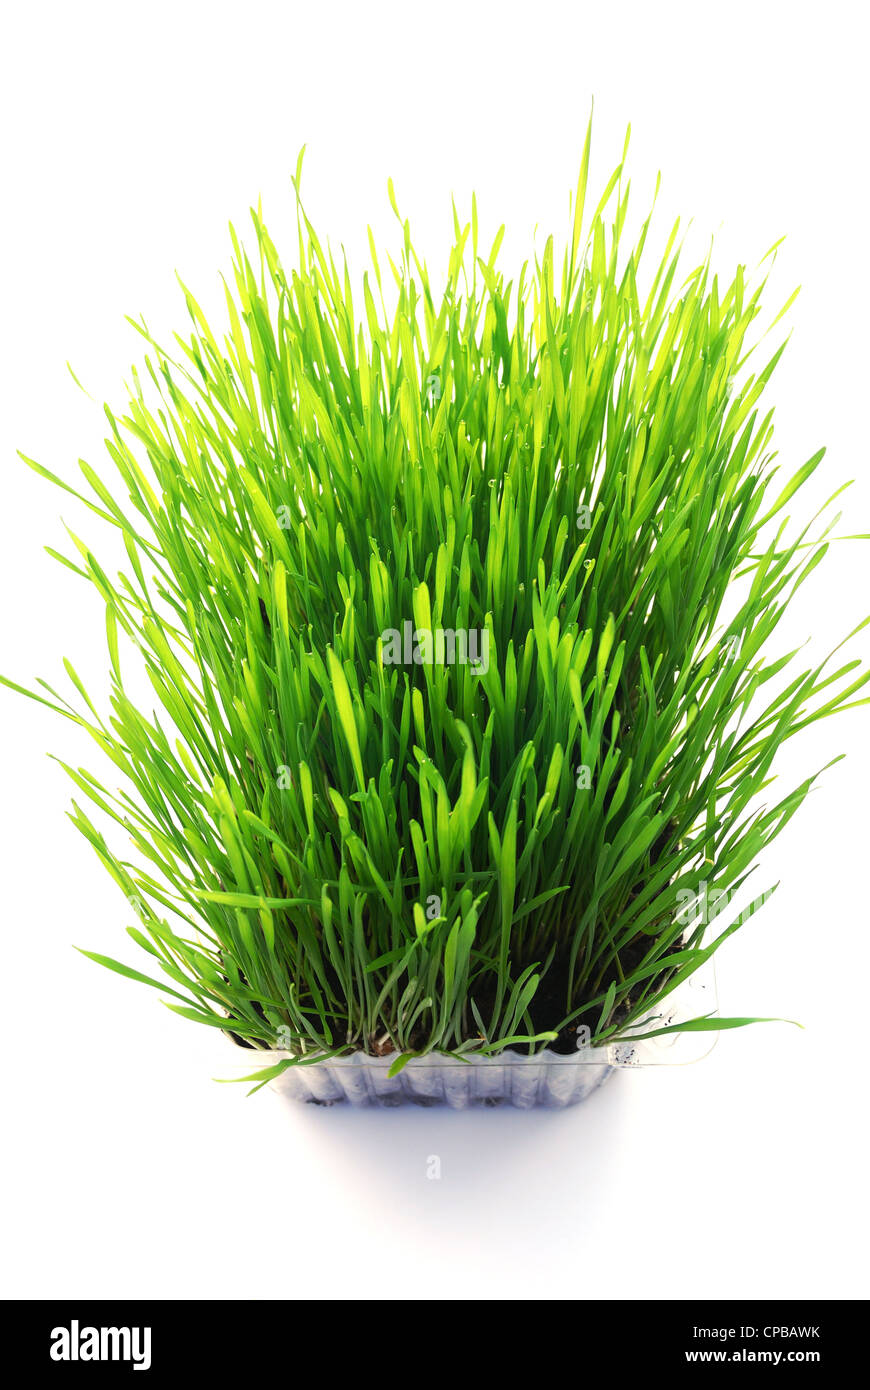 green young sprouts of wheat with tears of dew Stock Photo